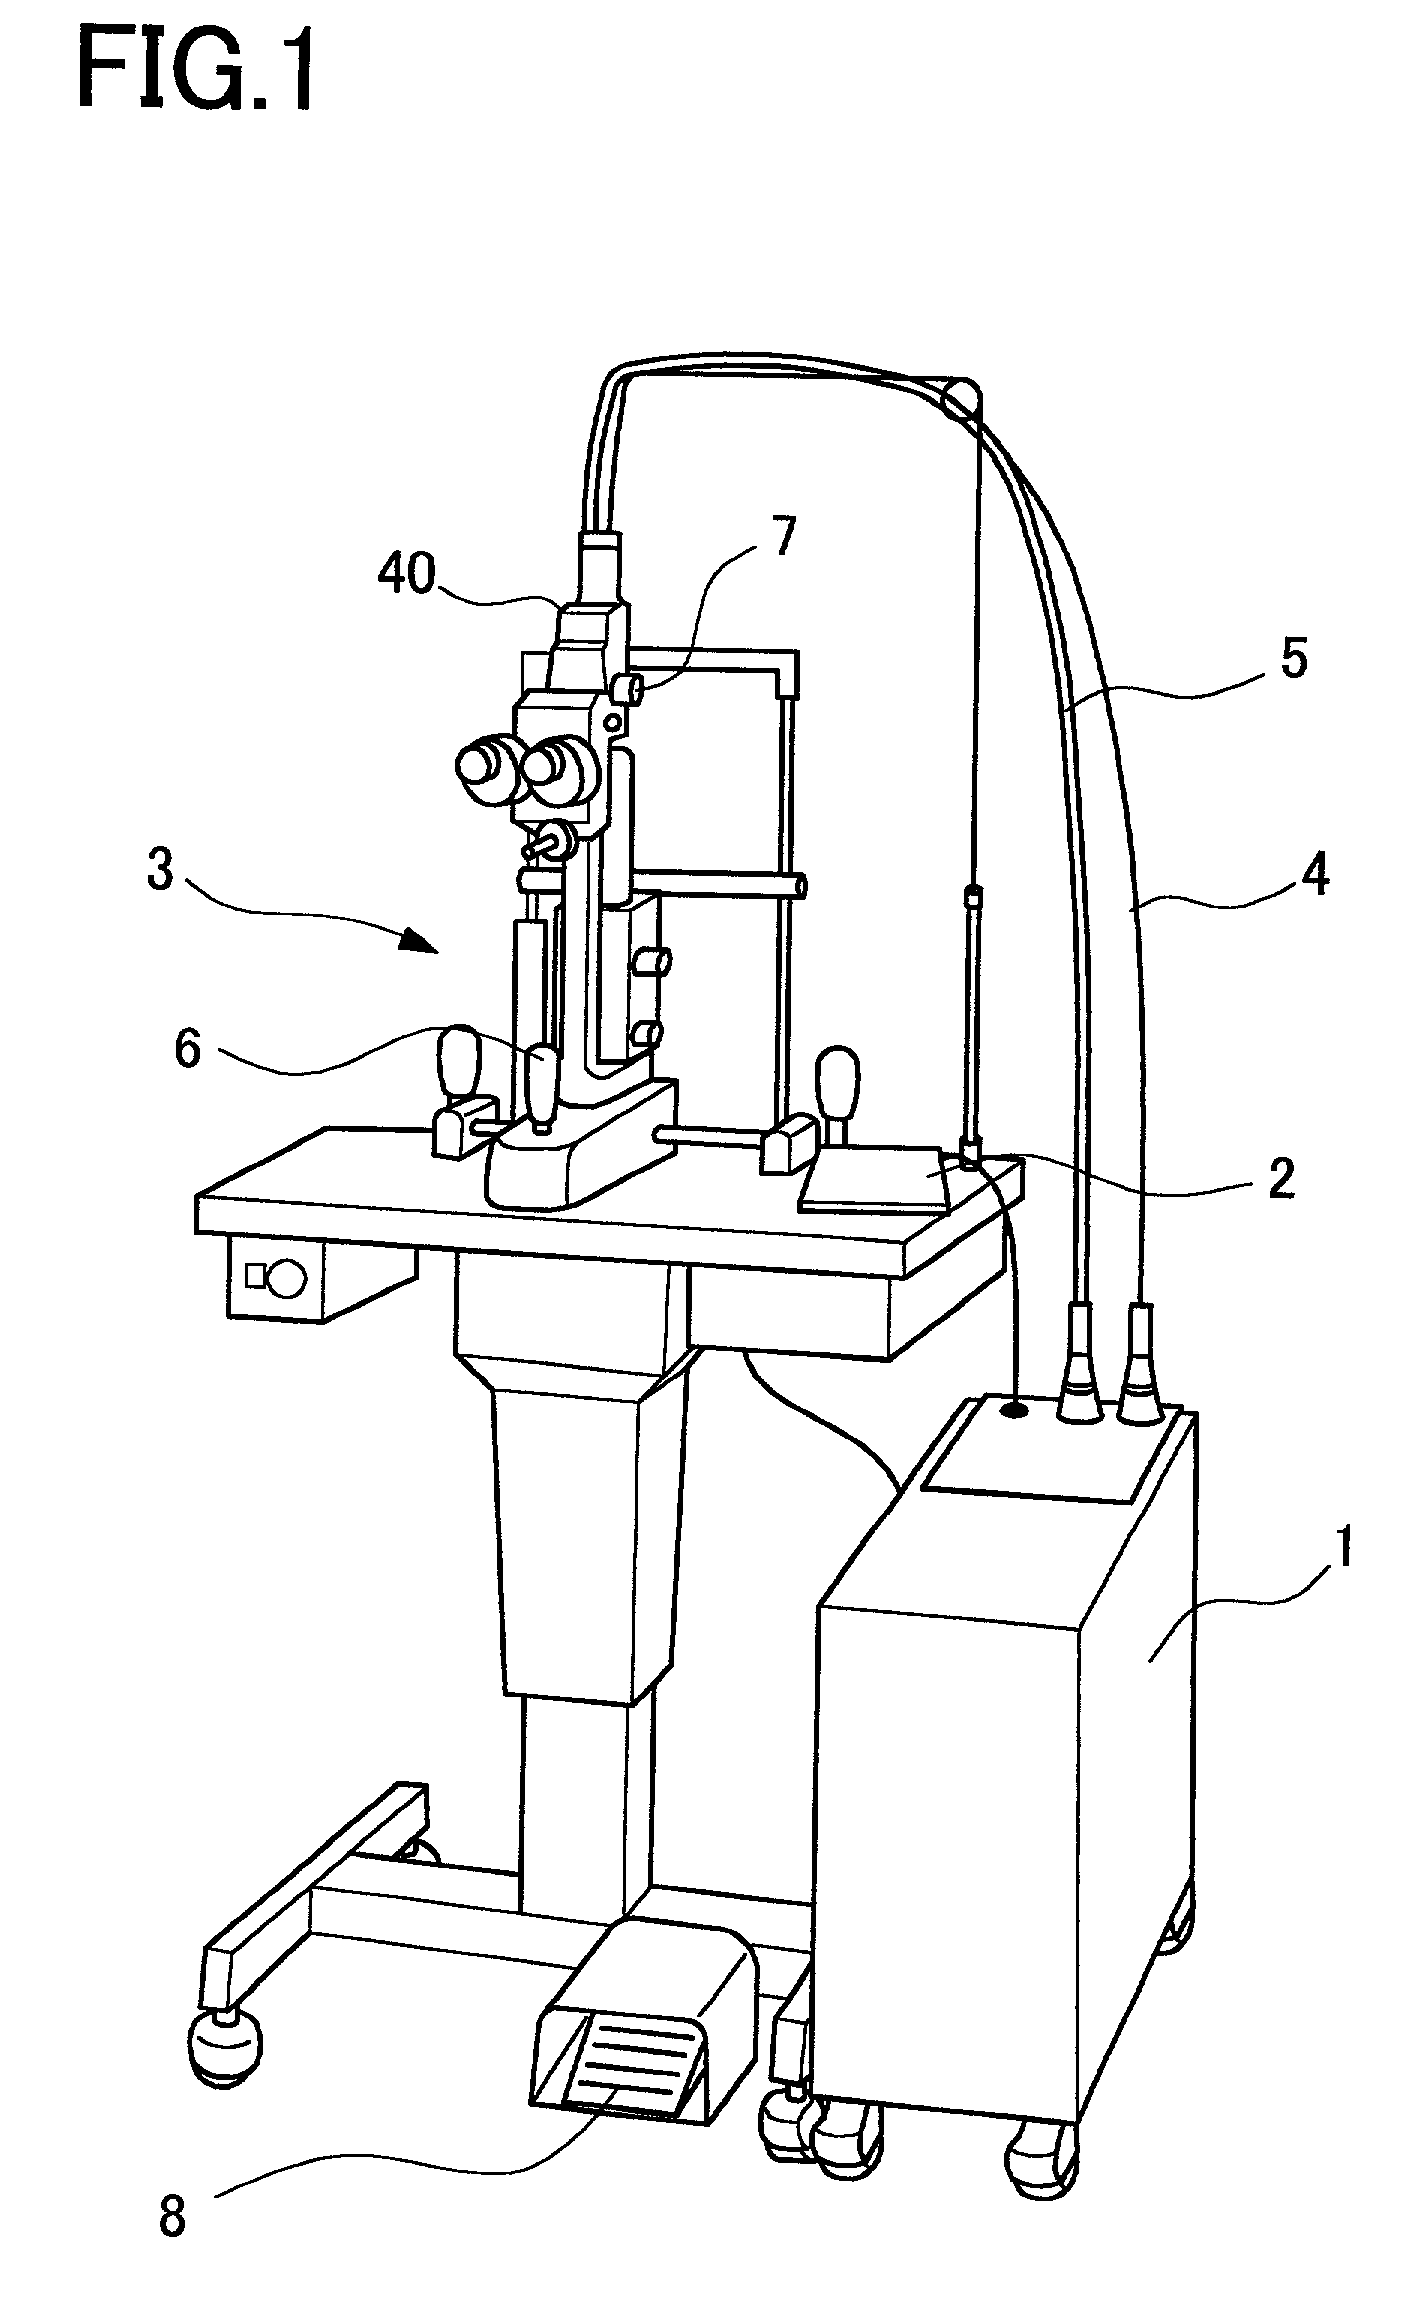 Ophthalmic laser treatment apparatus